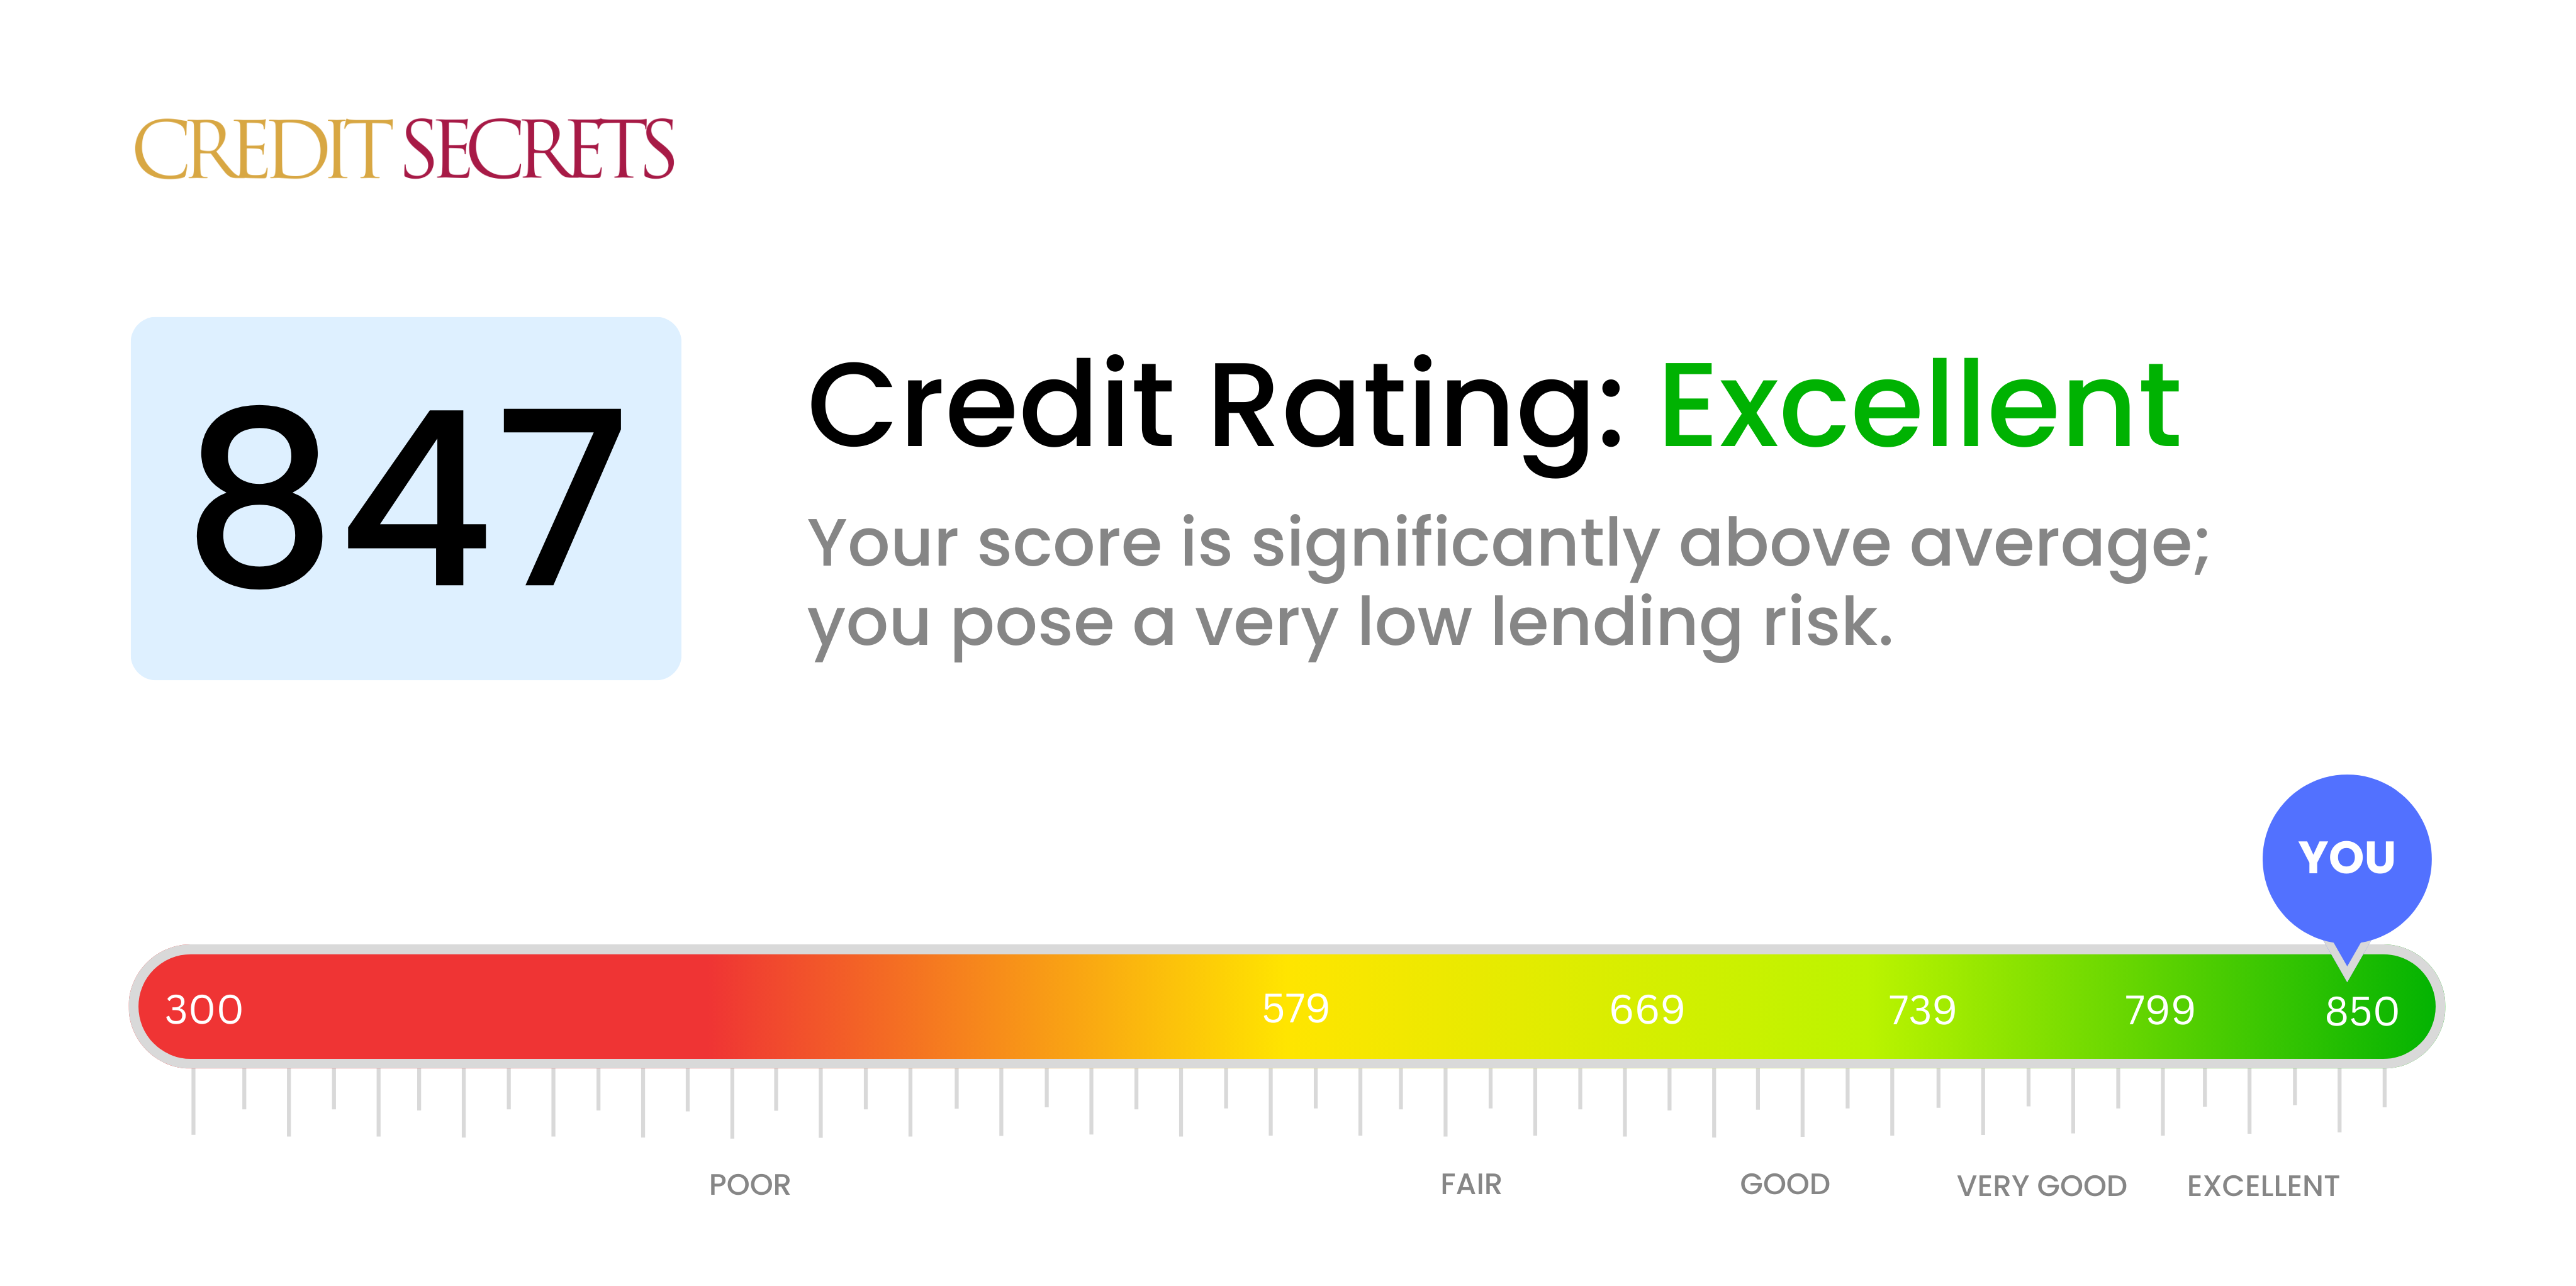 Is 847 a good credit score?